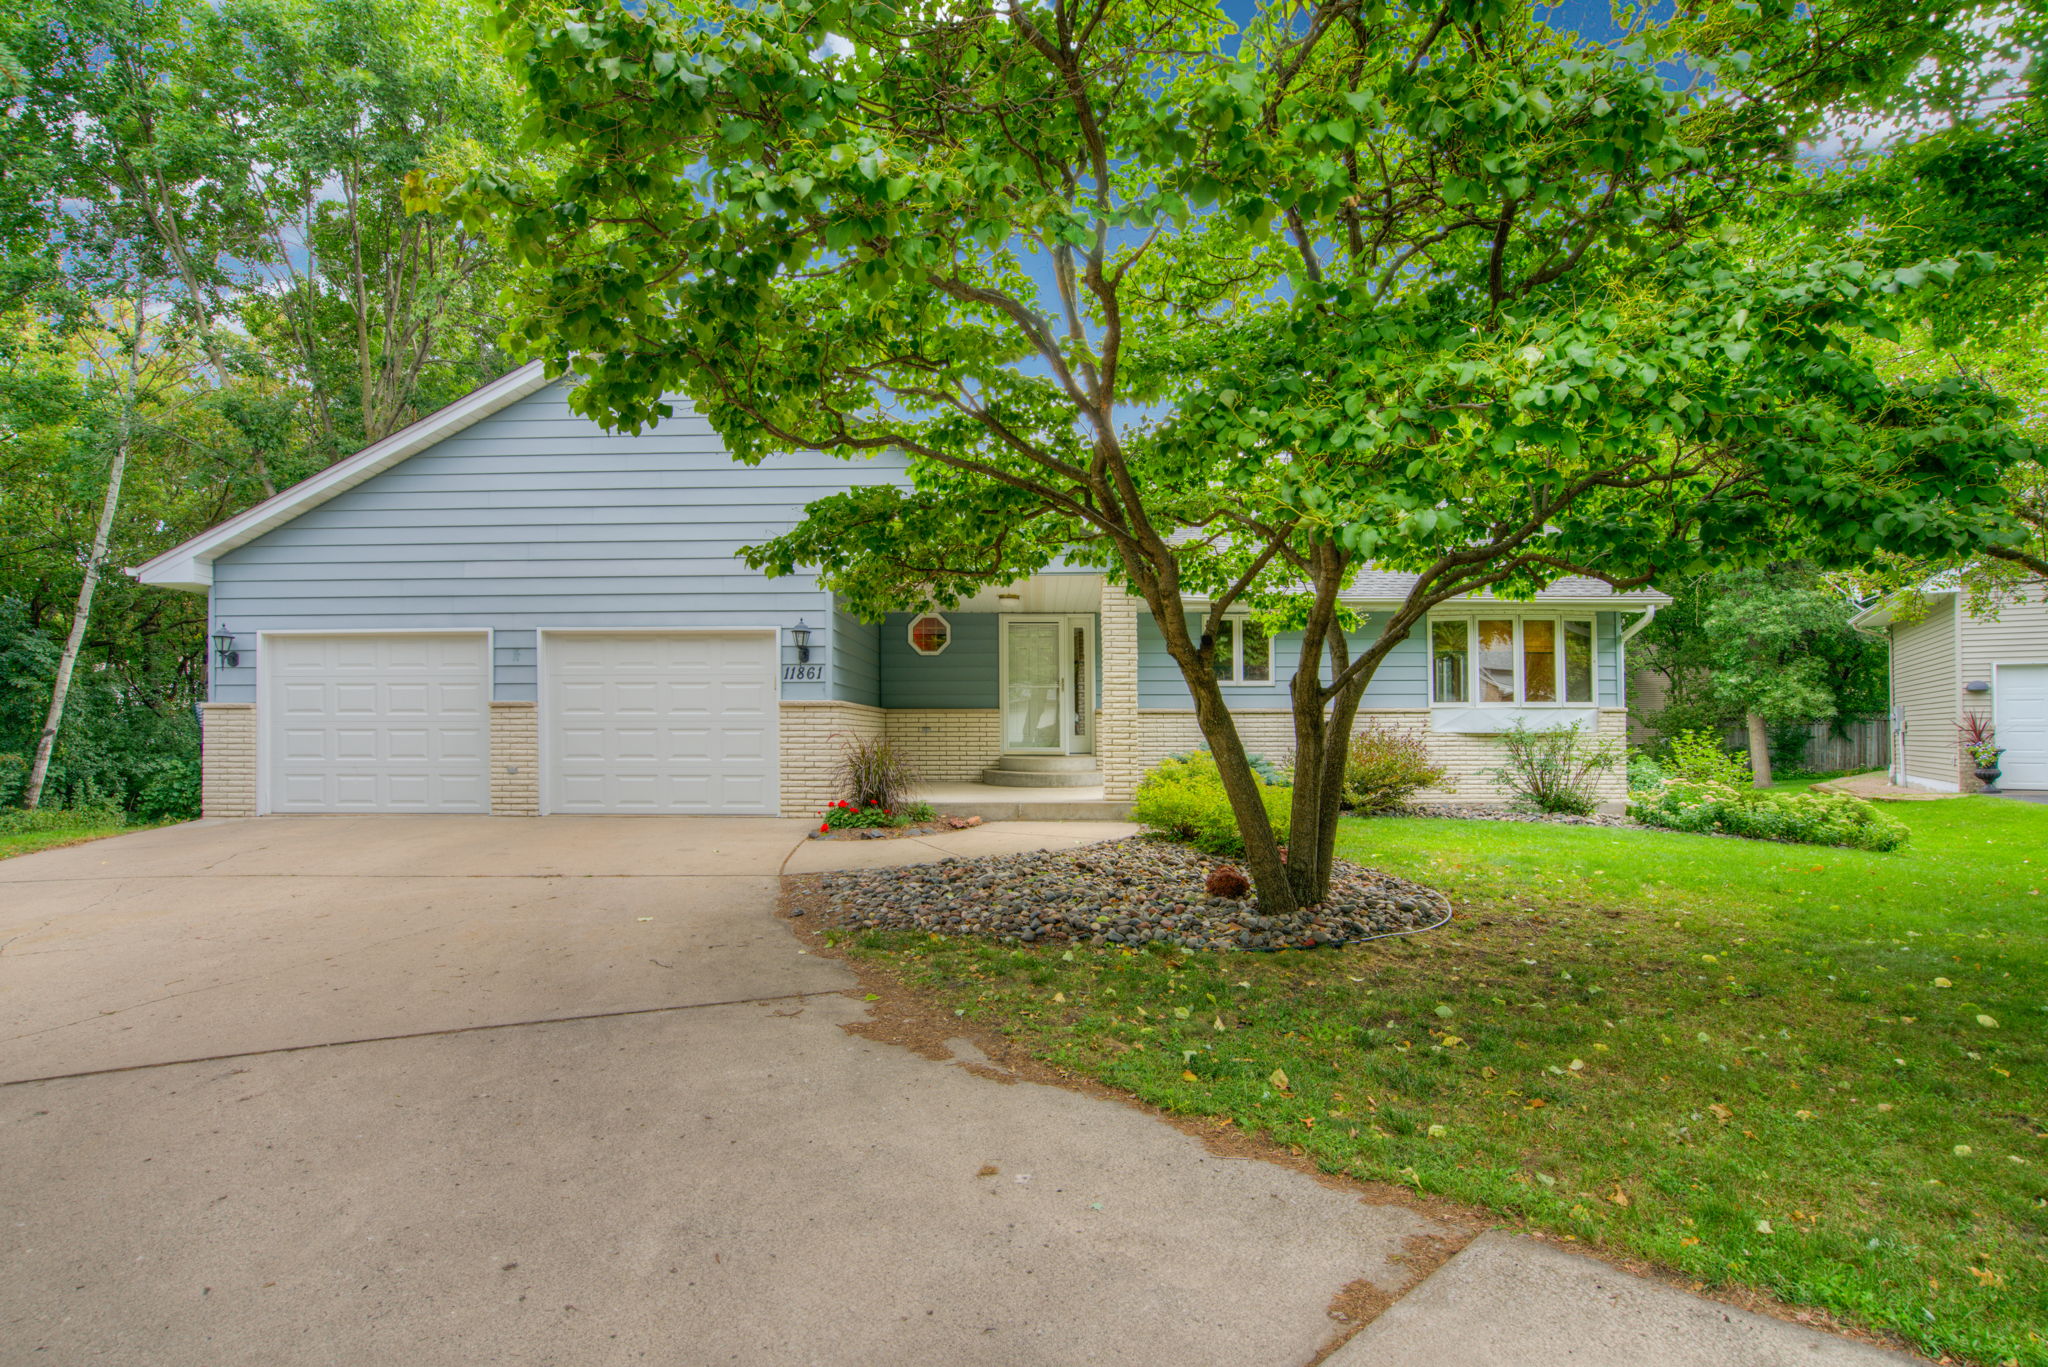  11861 Zilla St NW, Coon Rapids, MN 55448, US